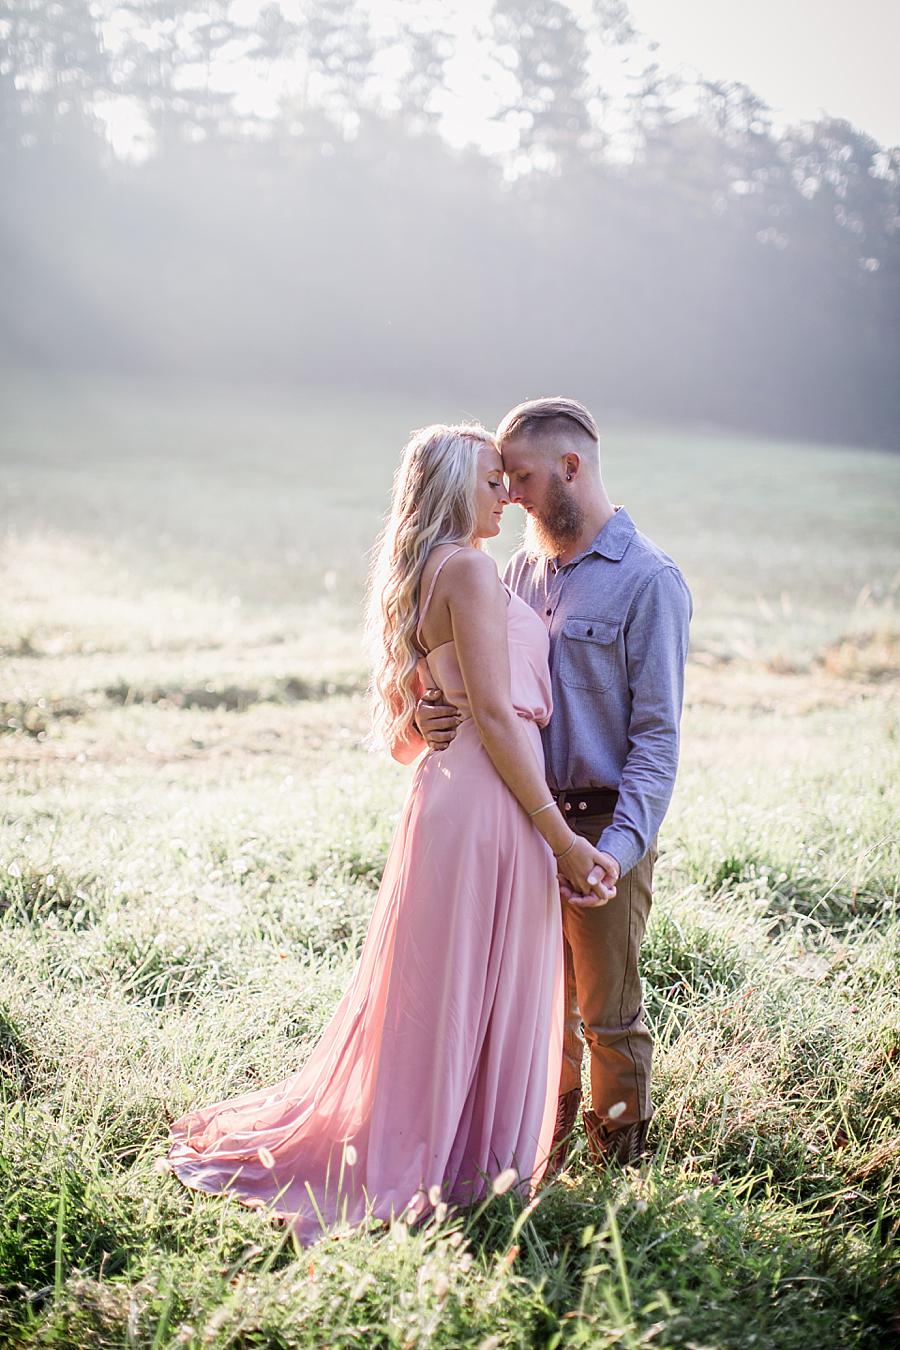 Hugging close in grass at this Townsend Anniversary session by Knoxville Wedding Photographer, Amanda May Photos.